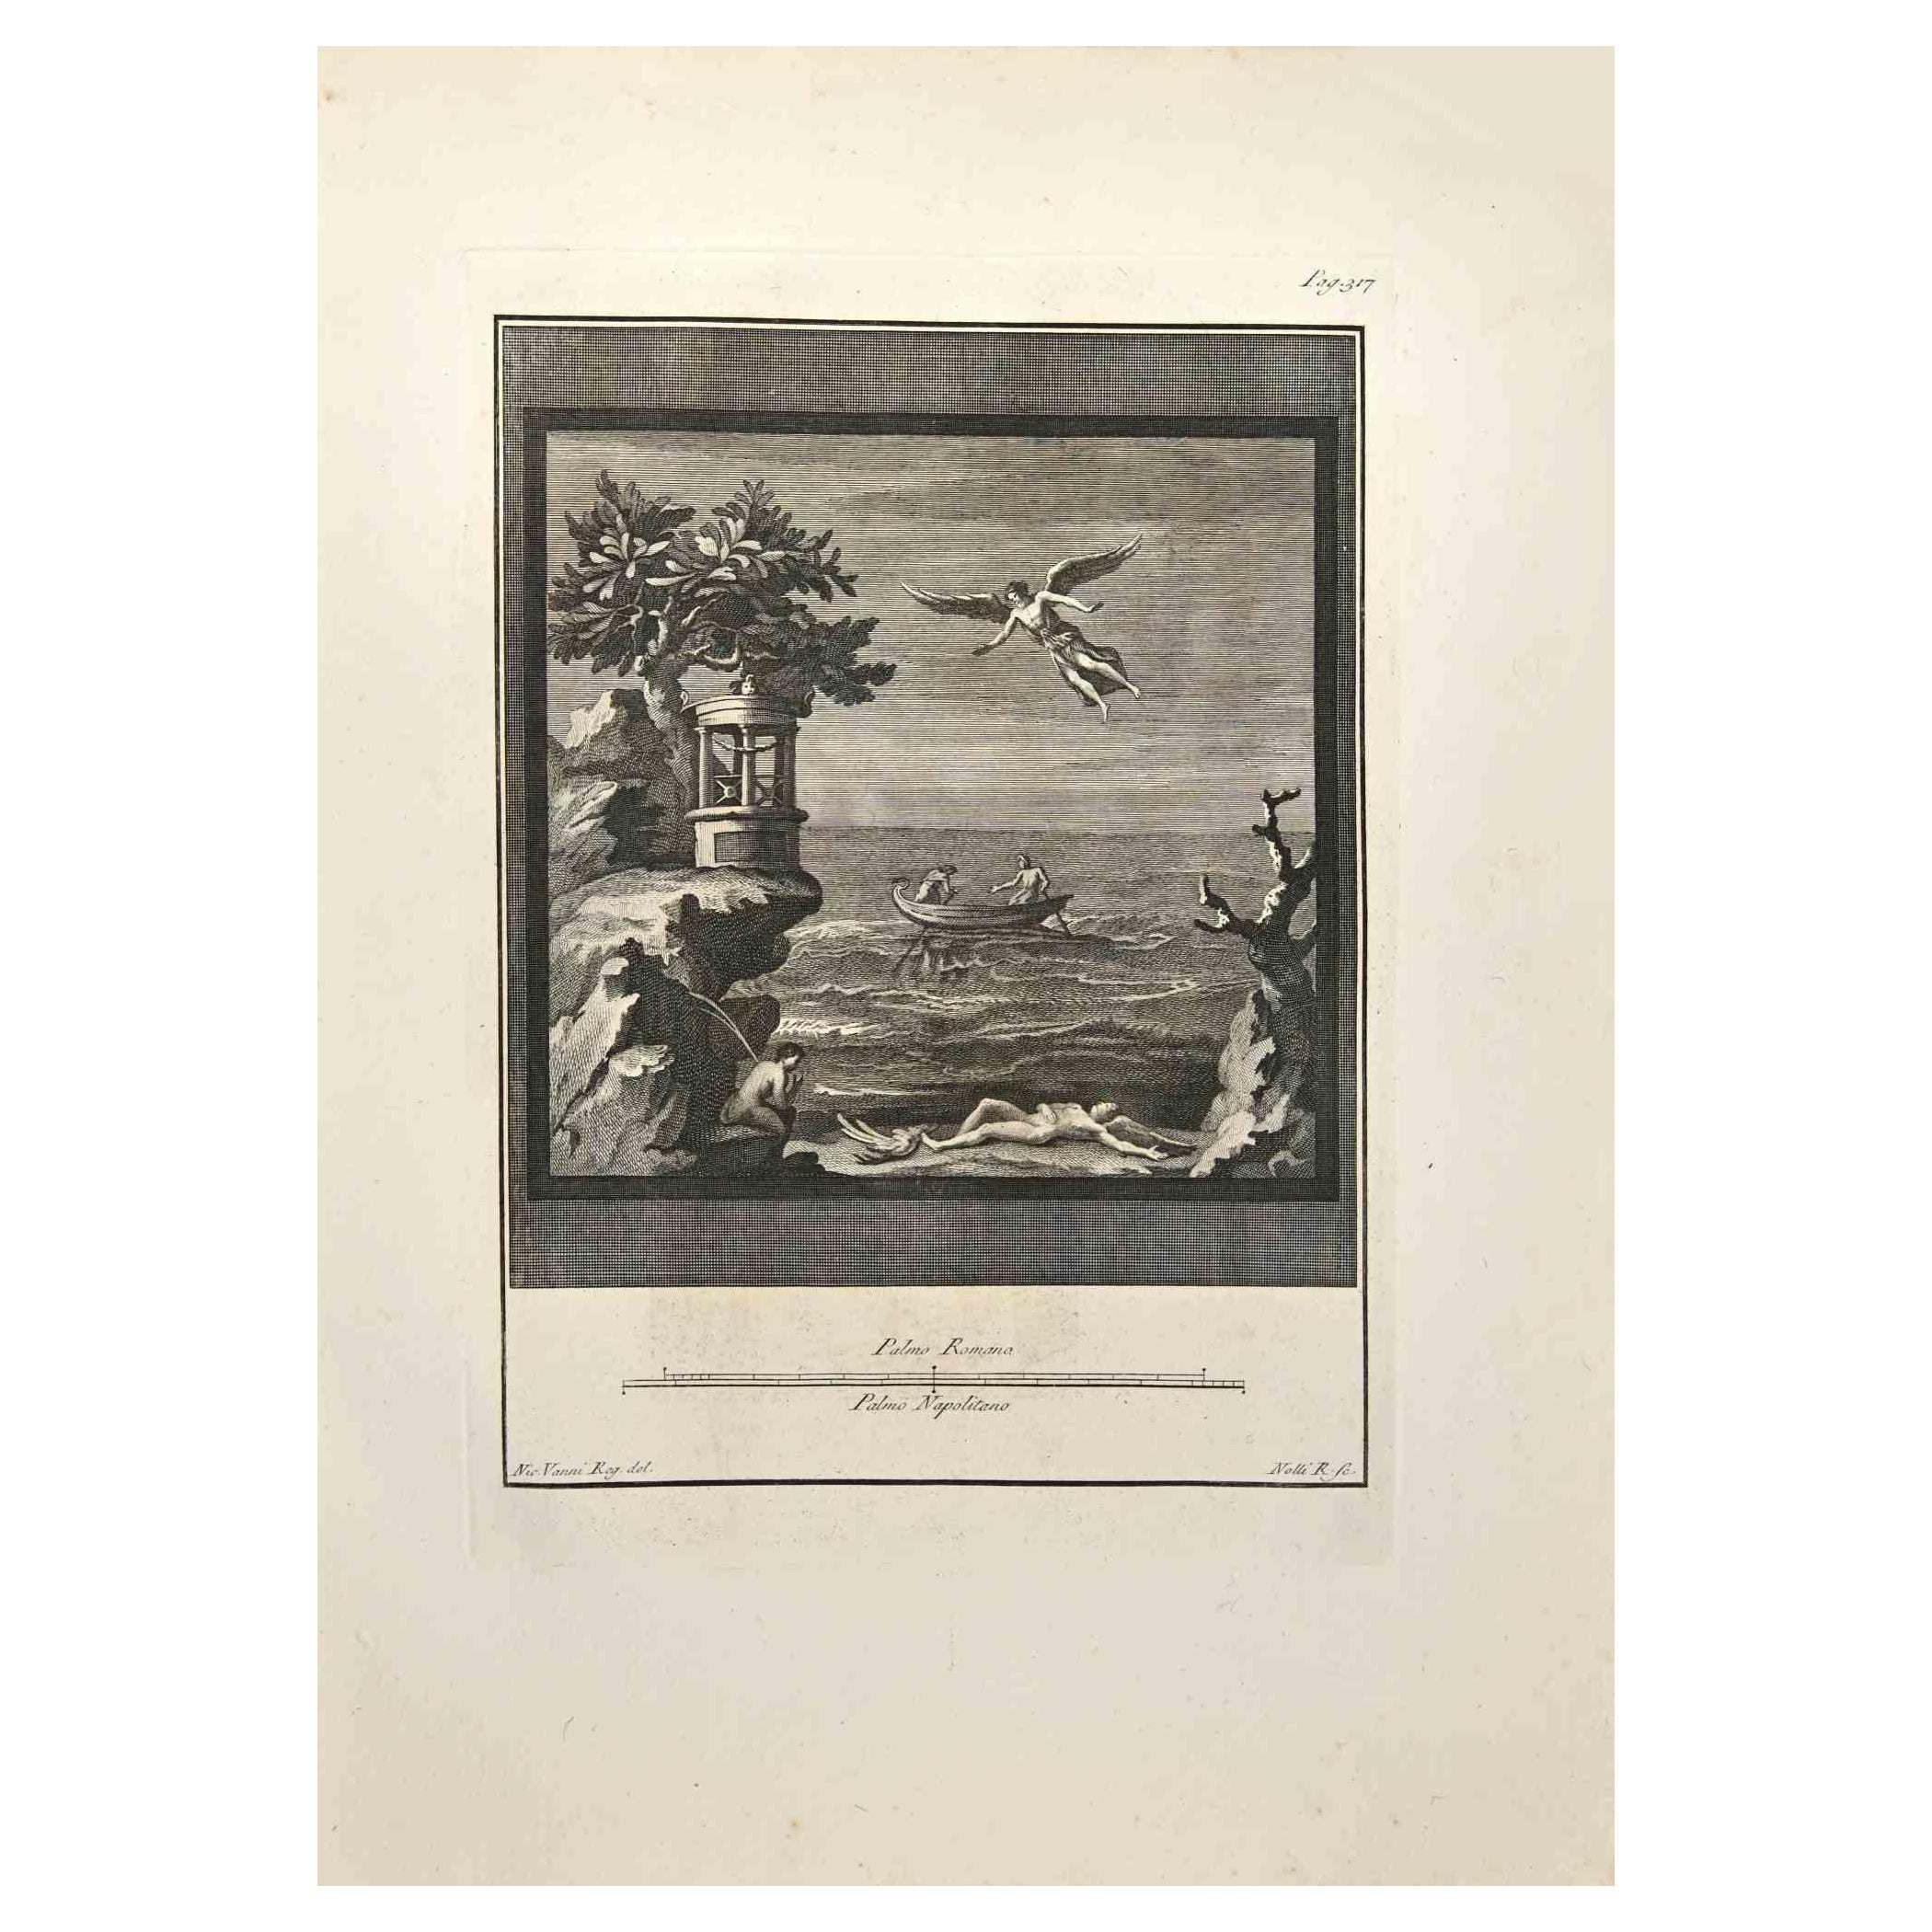 Ancient Roman Scene from the series "Antiquities of Herculaneum", is an etching on paper realized by Niccolò Vanni in the 18th Century.

Signed on the plate.

Good conditions with some folding.

The etching belongs to the print suite “Antiquities of